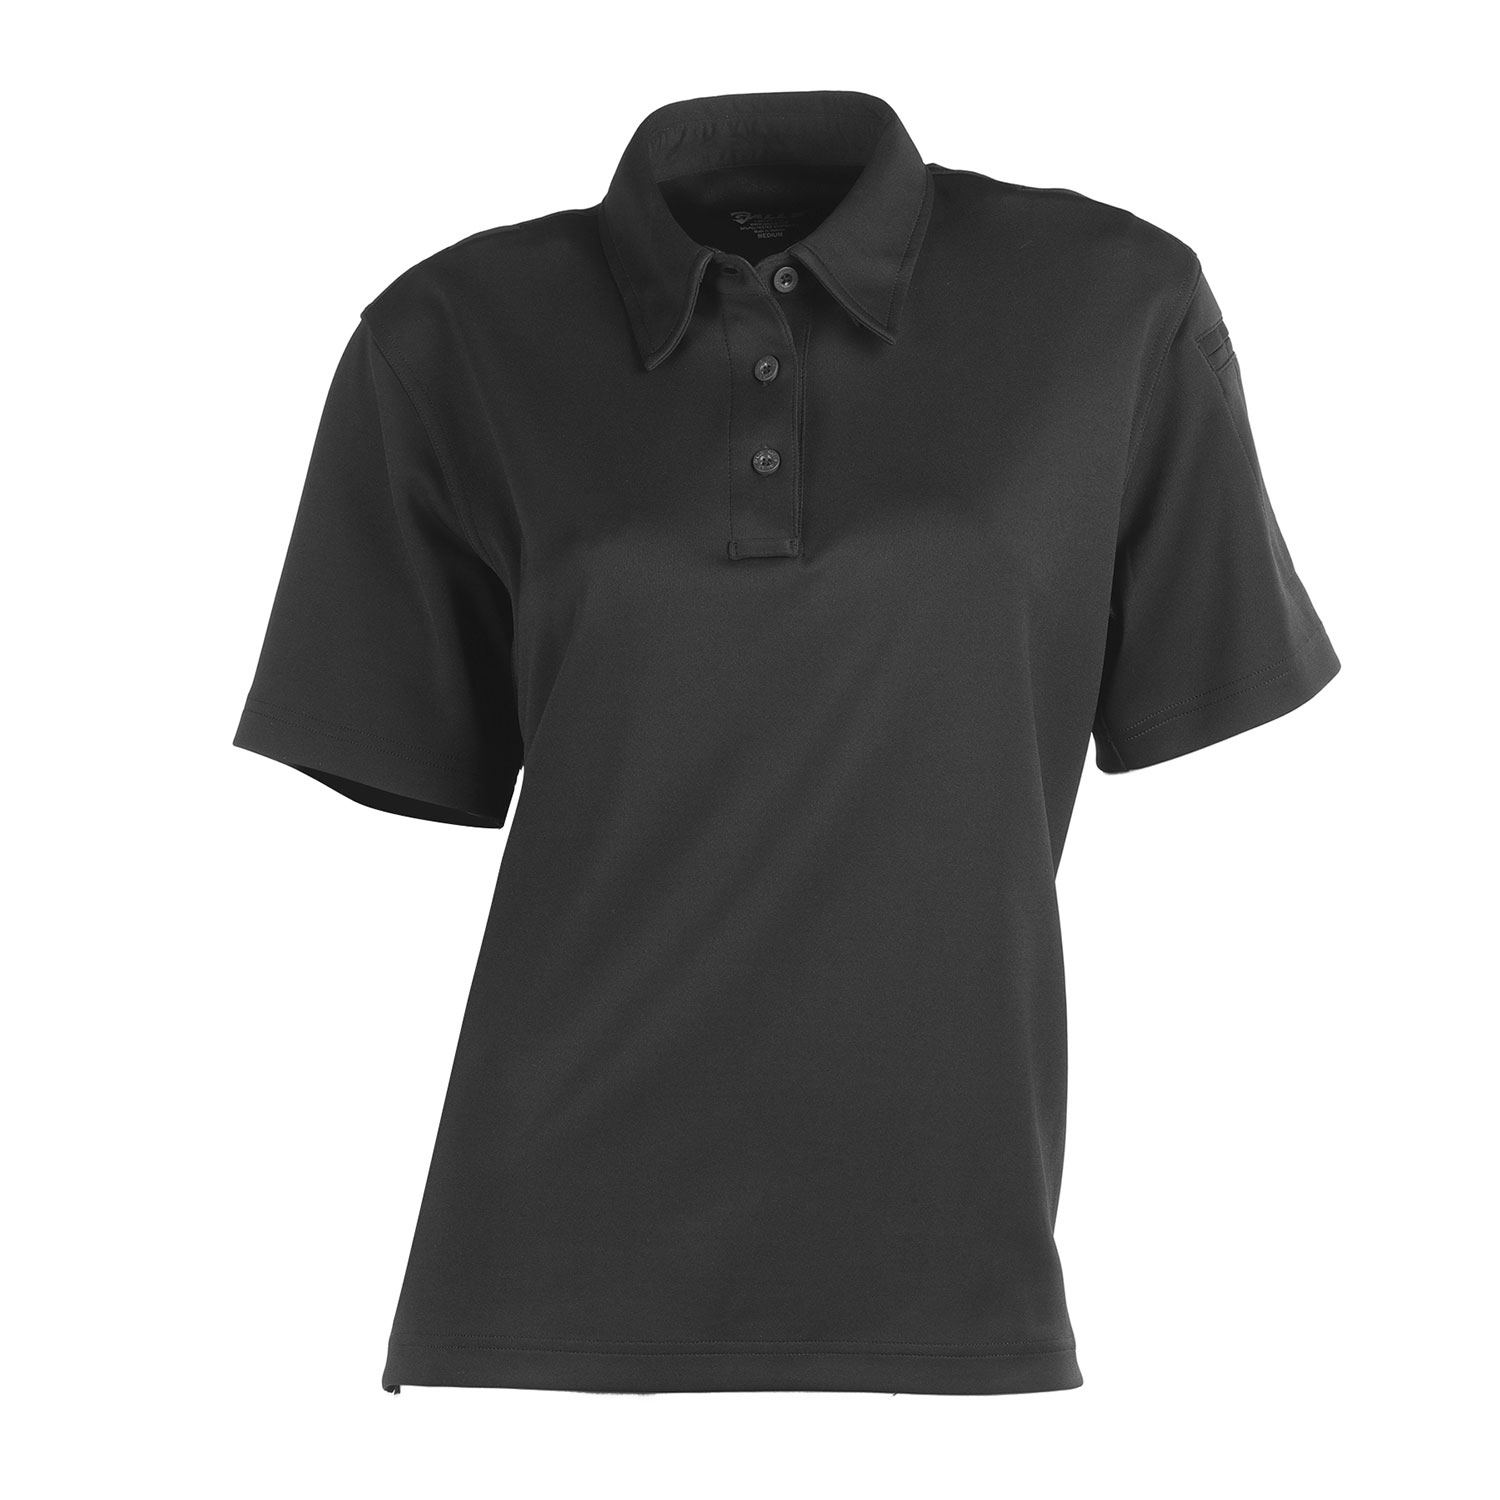 GALLS WOMENS SHORT SLEEVE COOLBEST II PERFORMANCE POLO